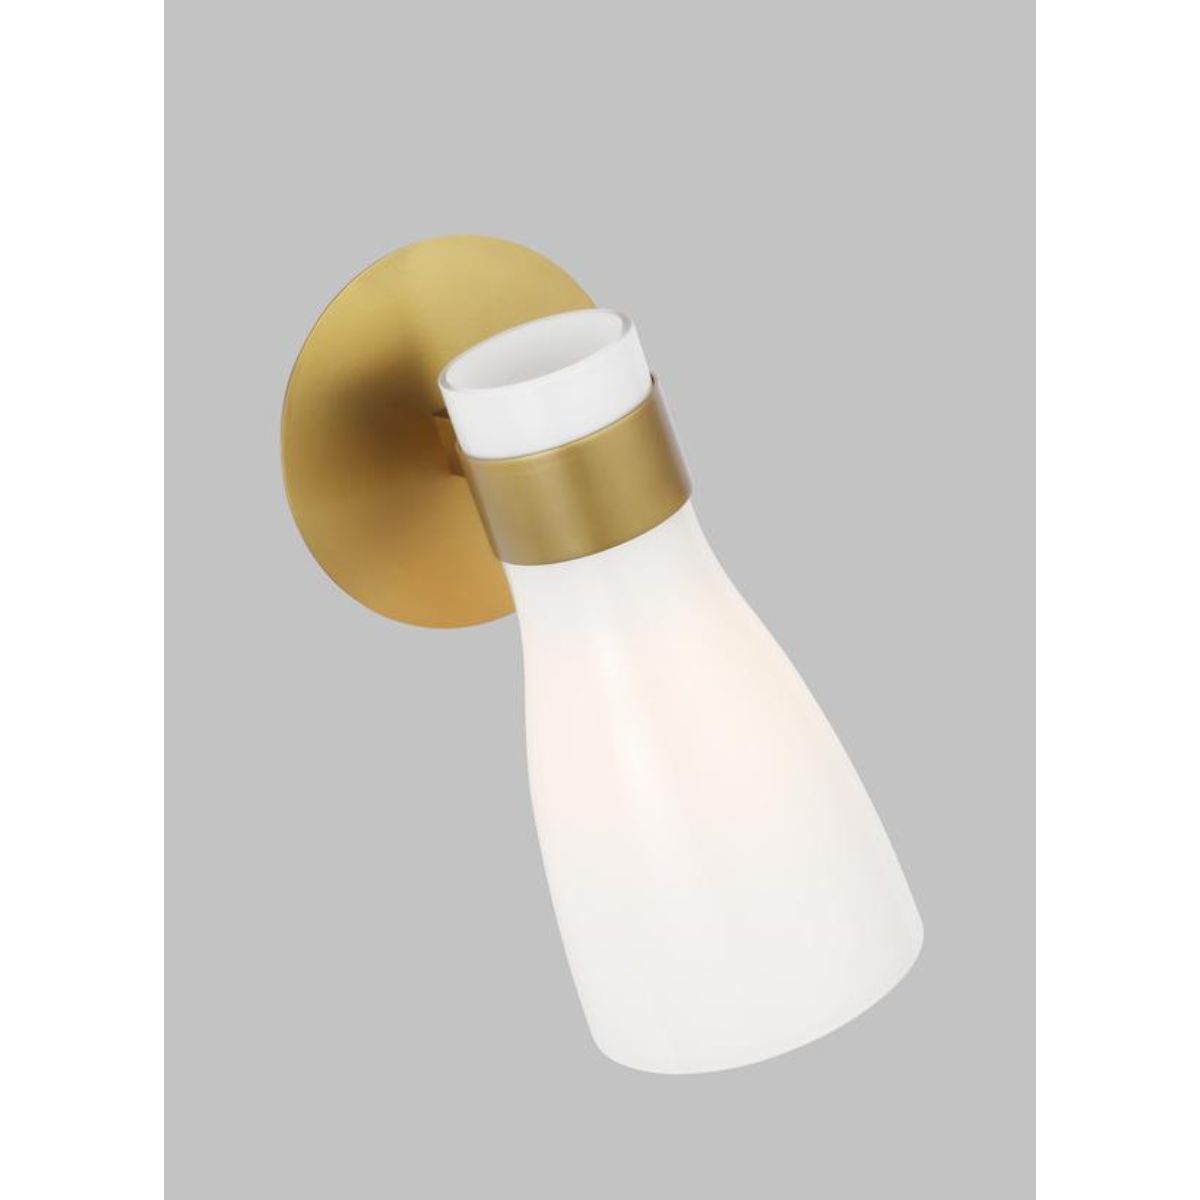 Moritz 11 in. Armed Sconce Burnished Brass with Milk White Glass finish